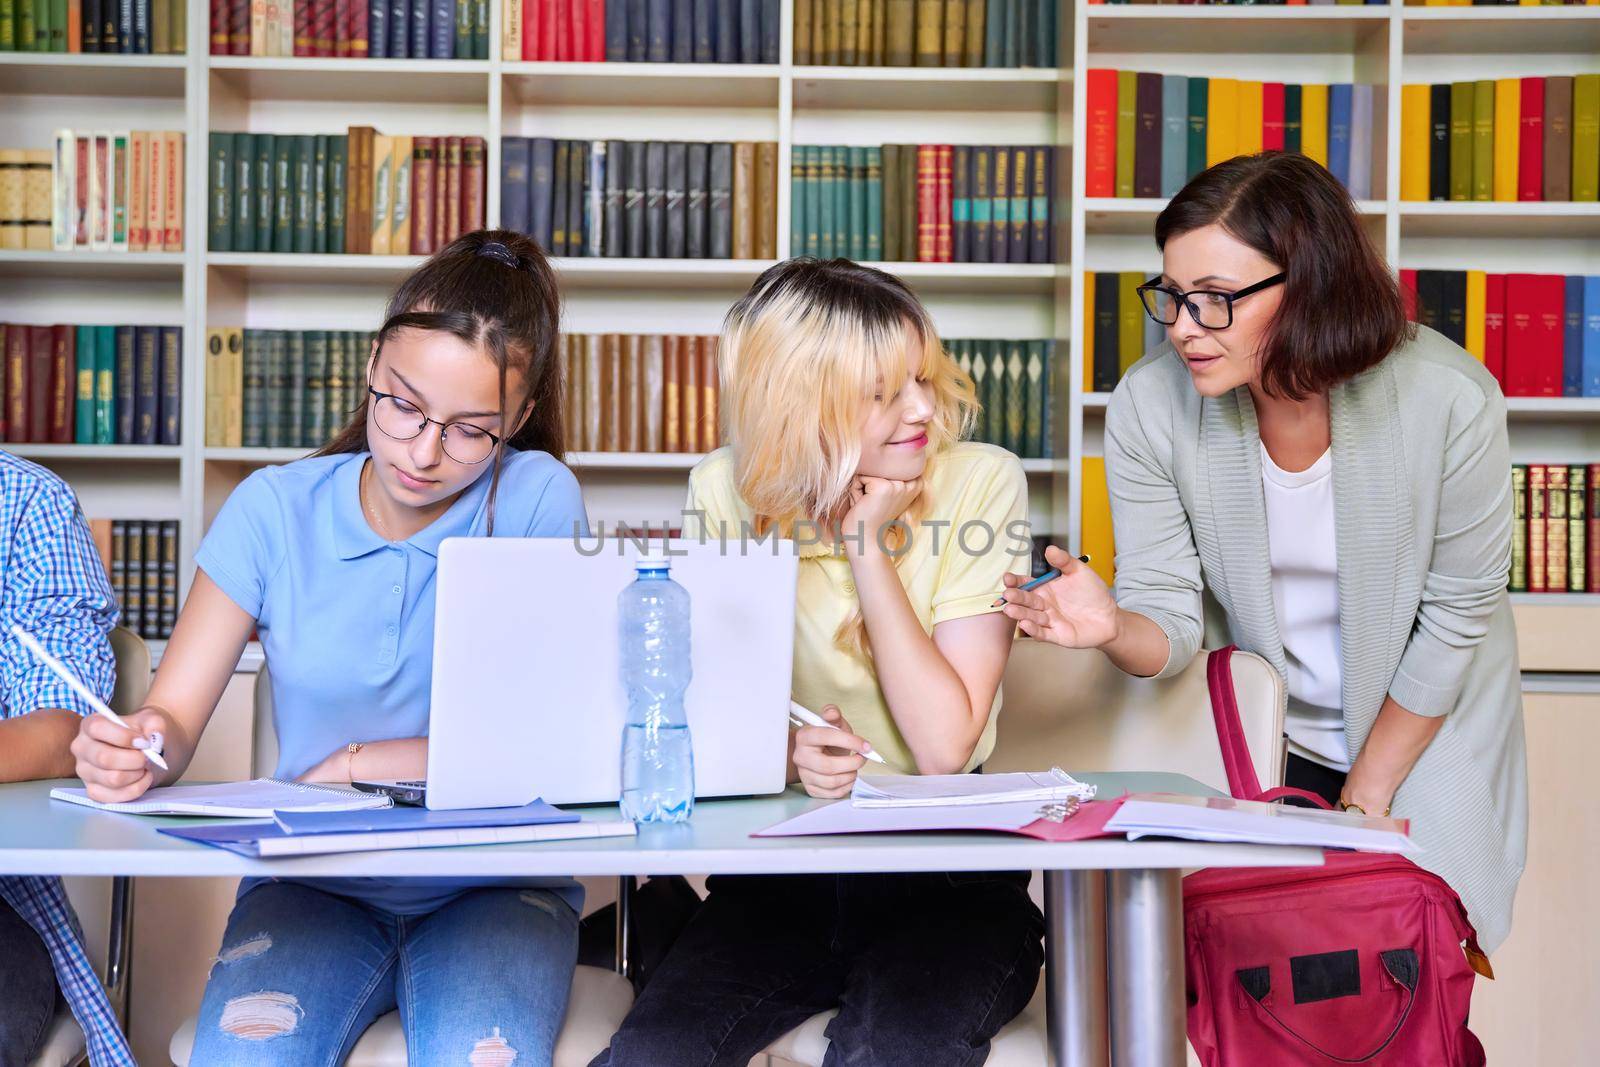 Girls teenage students studying in library with female teacher mentor. High school, education, adolescent, back to school, back to college concept